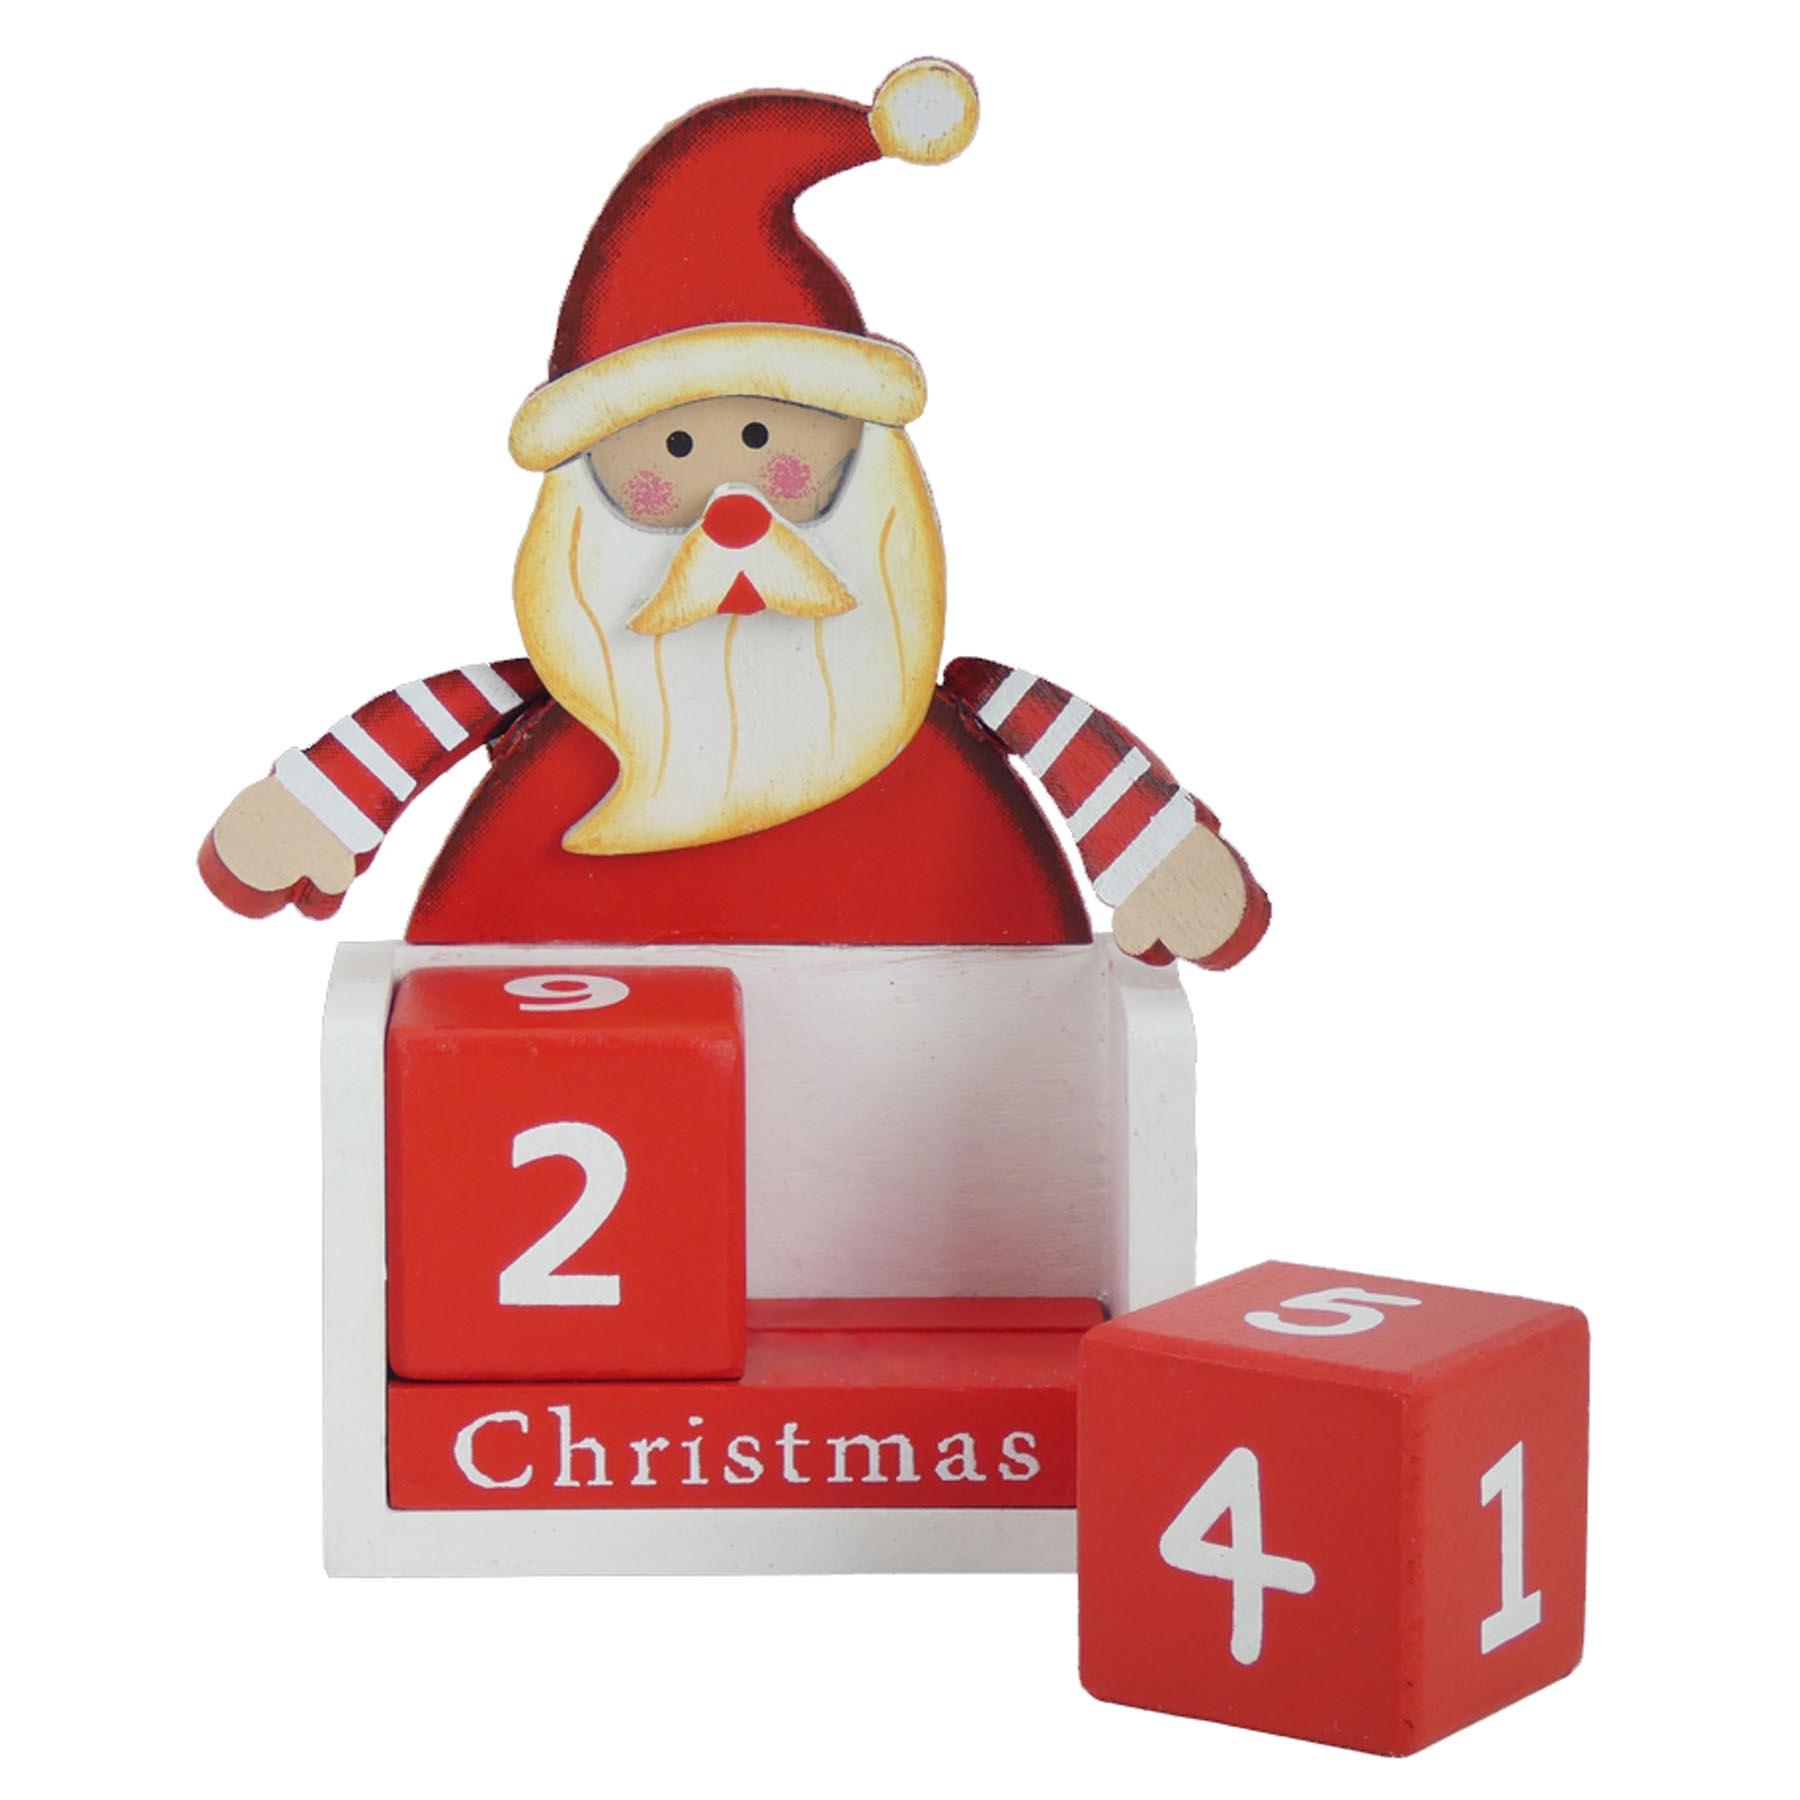 Christmas Perpetual Calendar in Red and White Wooden Santa Design